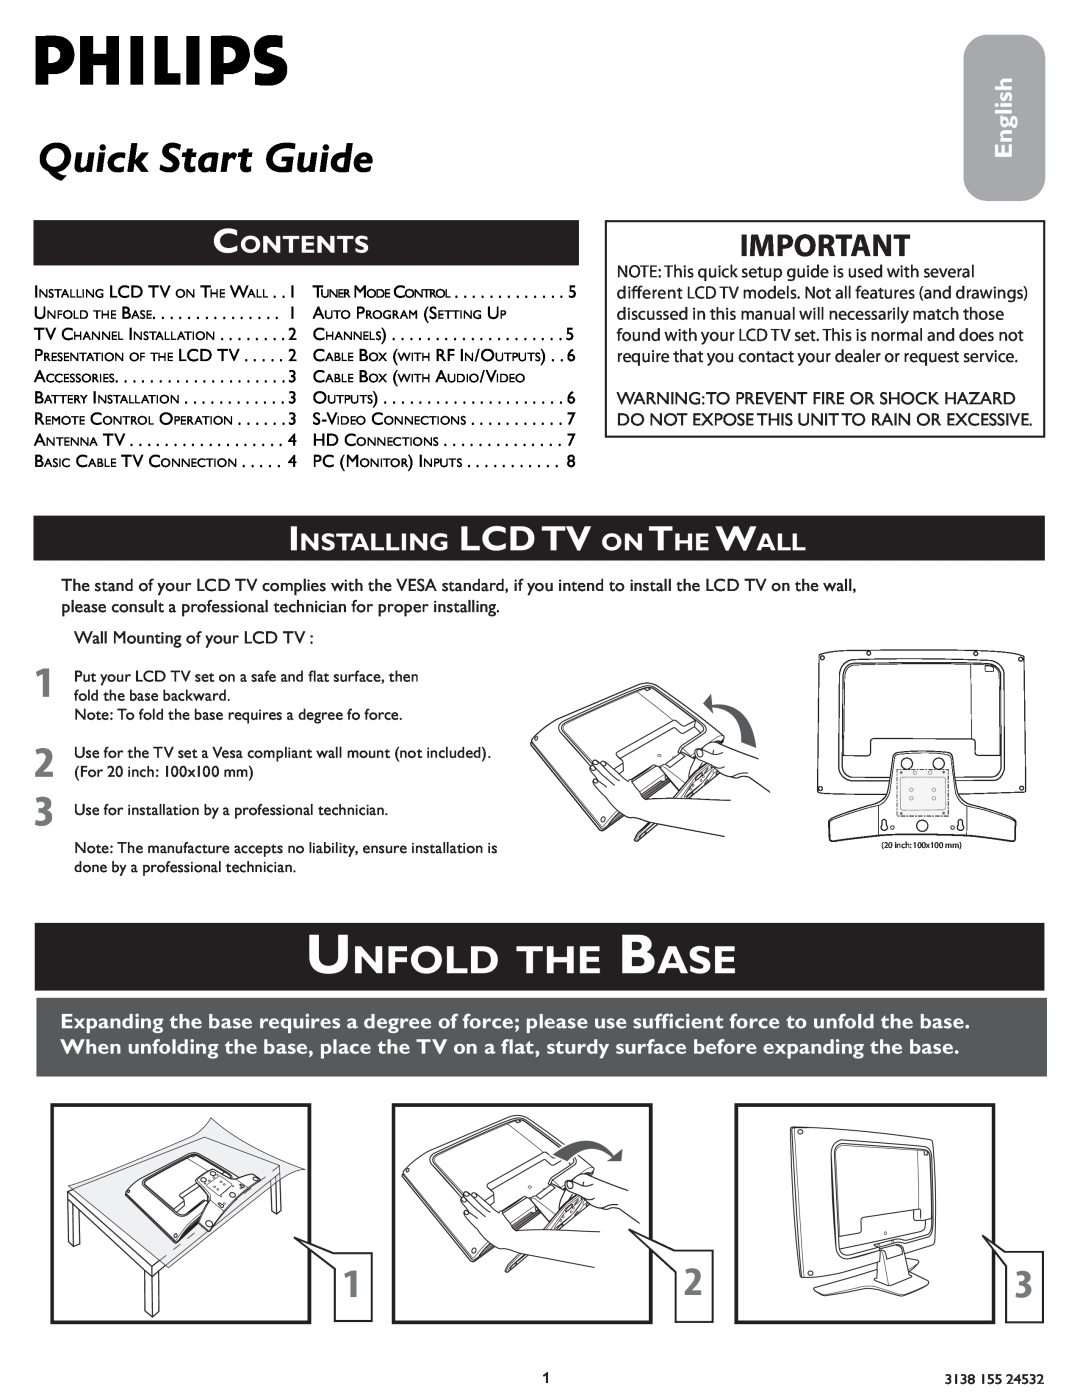 Philips Wall Mounting quick start Unfold The Base, Contents, Installing Lcdtv On The Wall, Quick Start Guide, English 